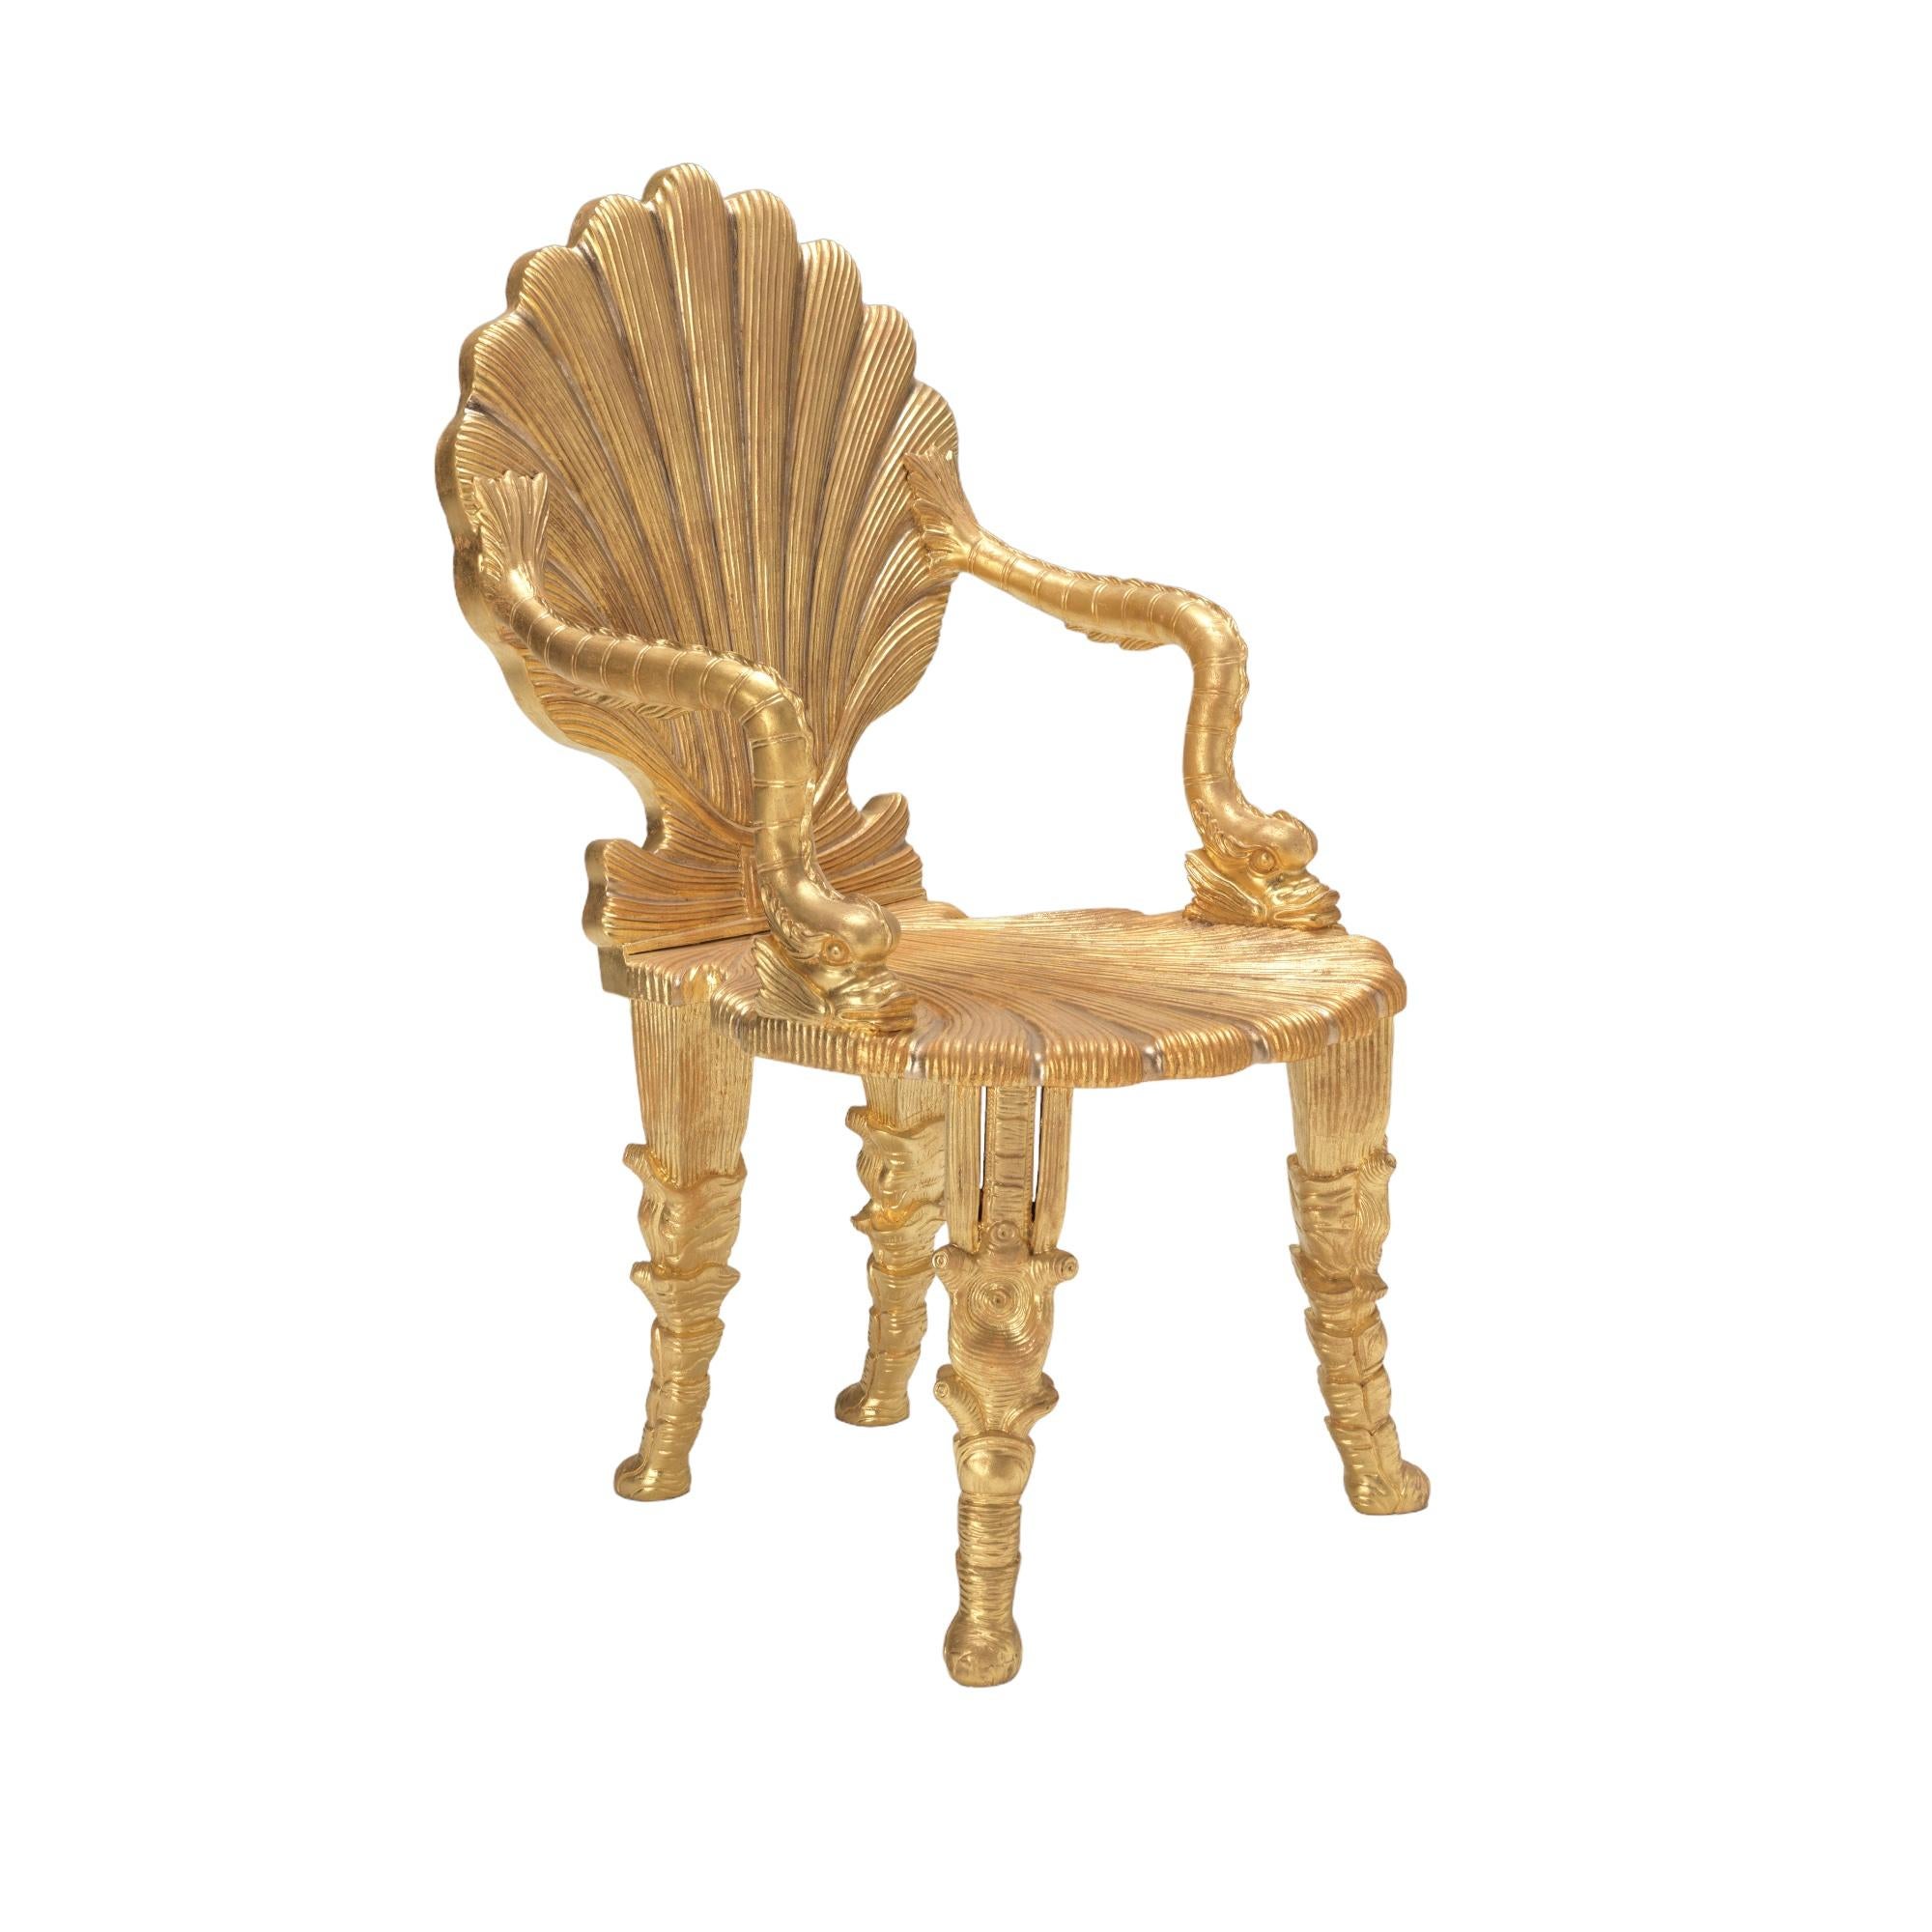 An exceptional model Grotto chair, the scallop shell back to scallop shell seat connected with stylized dolphin arms. The chairs with specialist aged grotto style gilding.